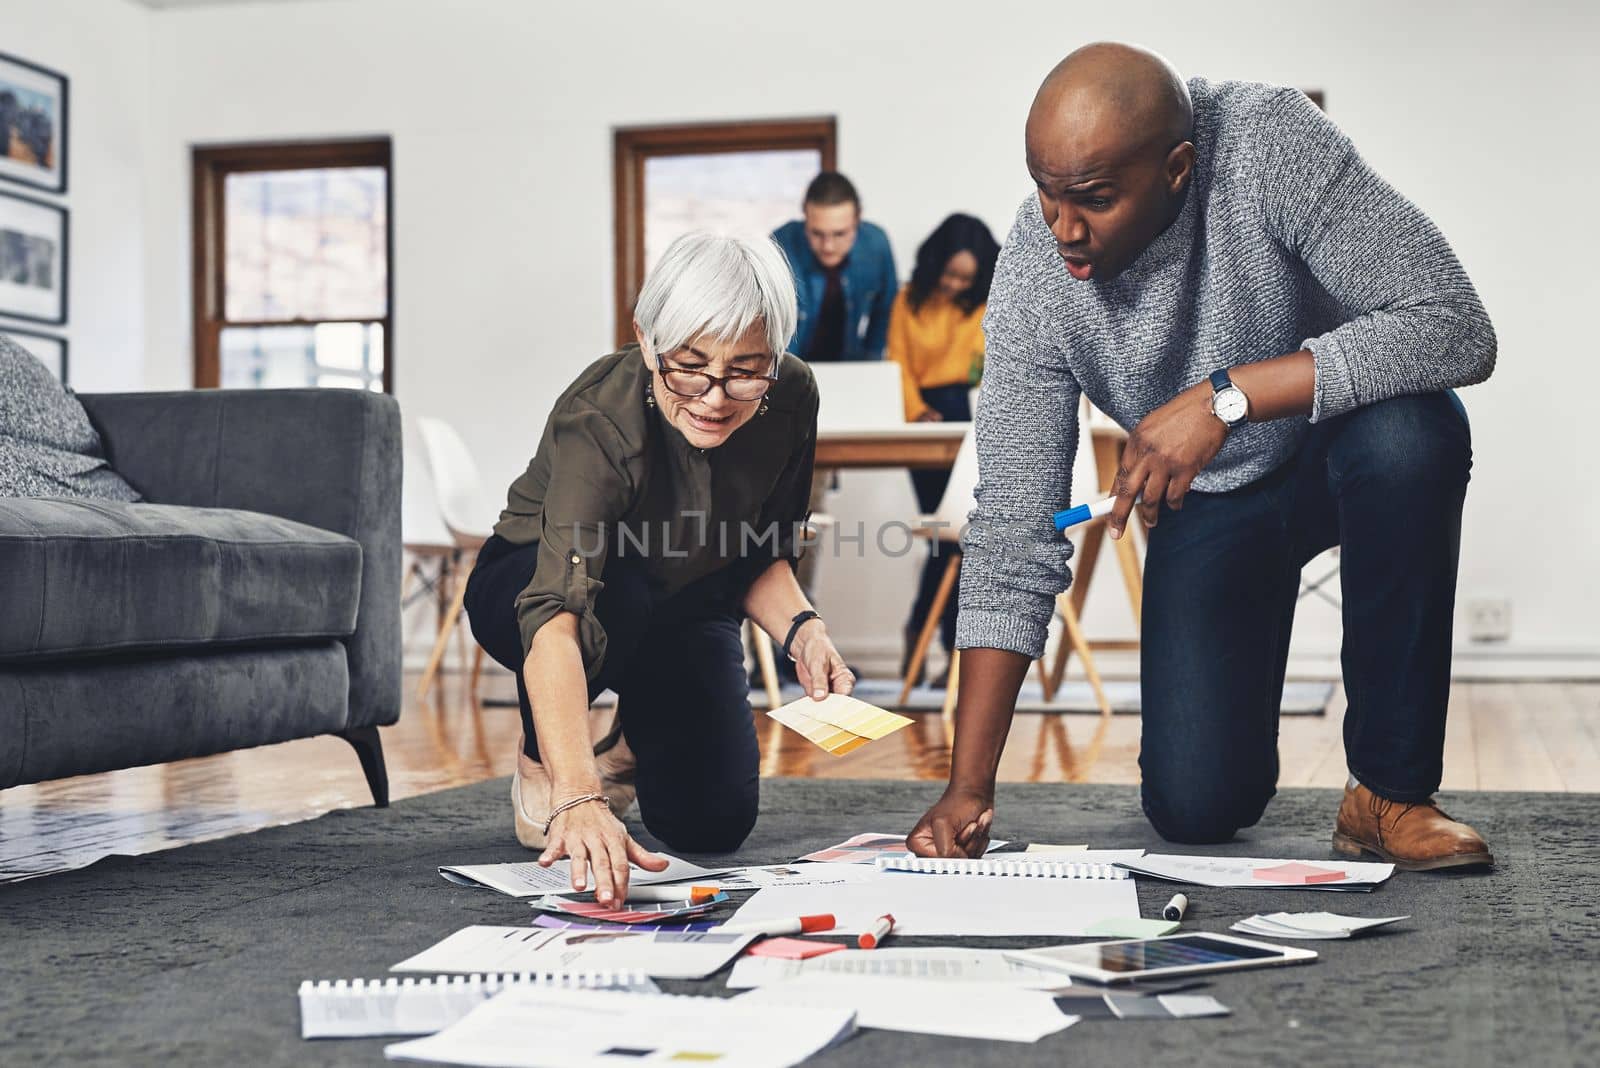 This setup is simple but effective. Full length shot of two businesspeople looking over paperwork while working on the floor of their office